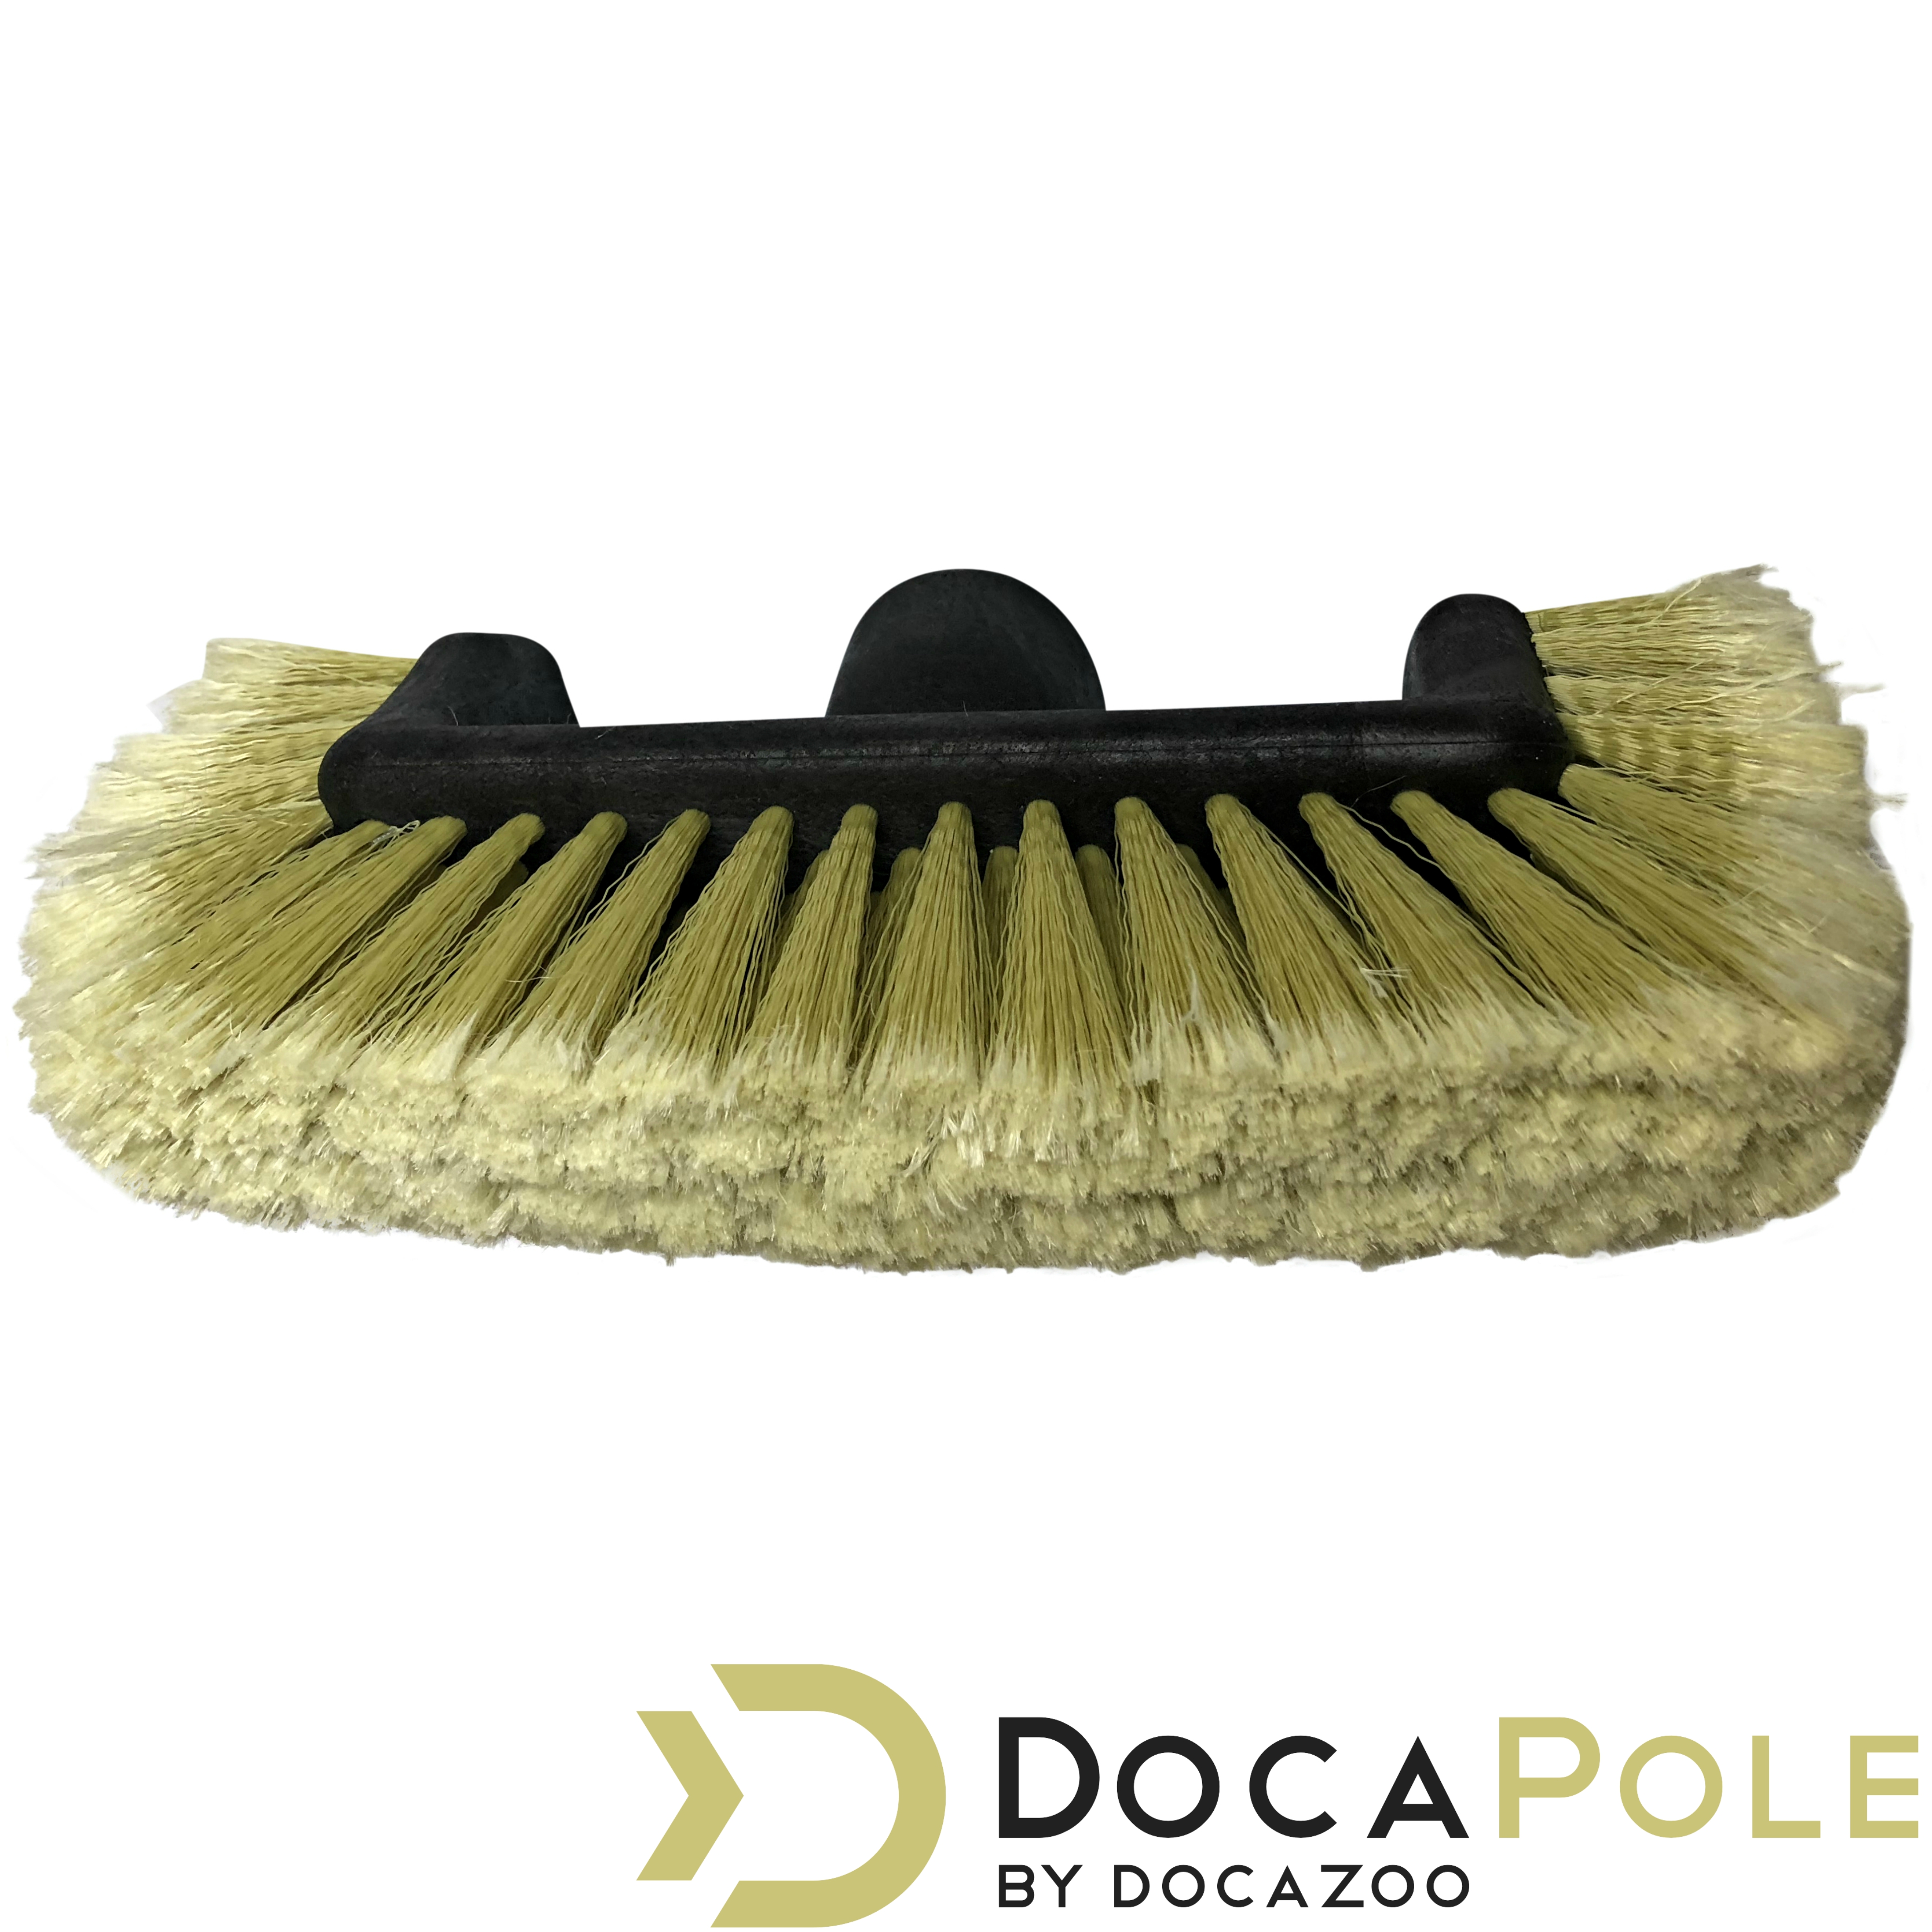 DocaPole 6-24' Soft Bristle Car Wash Brush & Extension Pole |11" Scrub Brush with 12 Foot Handle | Long-Reach Cleaning Brush and Deck Brush for Car, Truck, Boat, RV, House Siding, Floor, and More - image 3 of 7